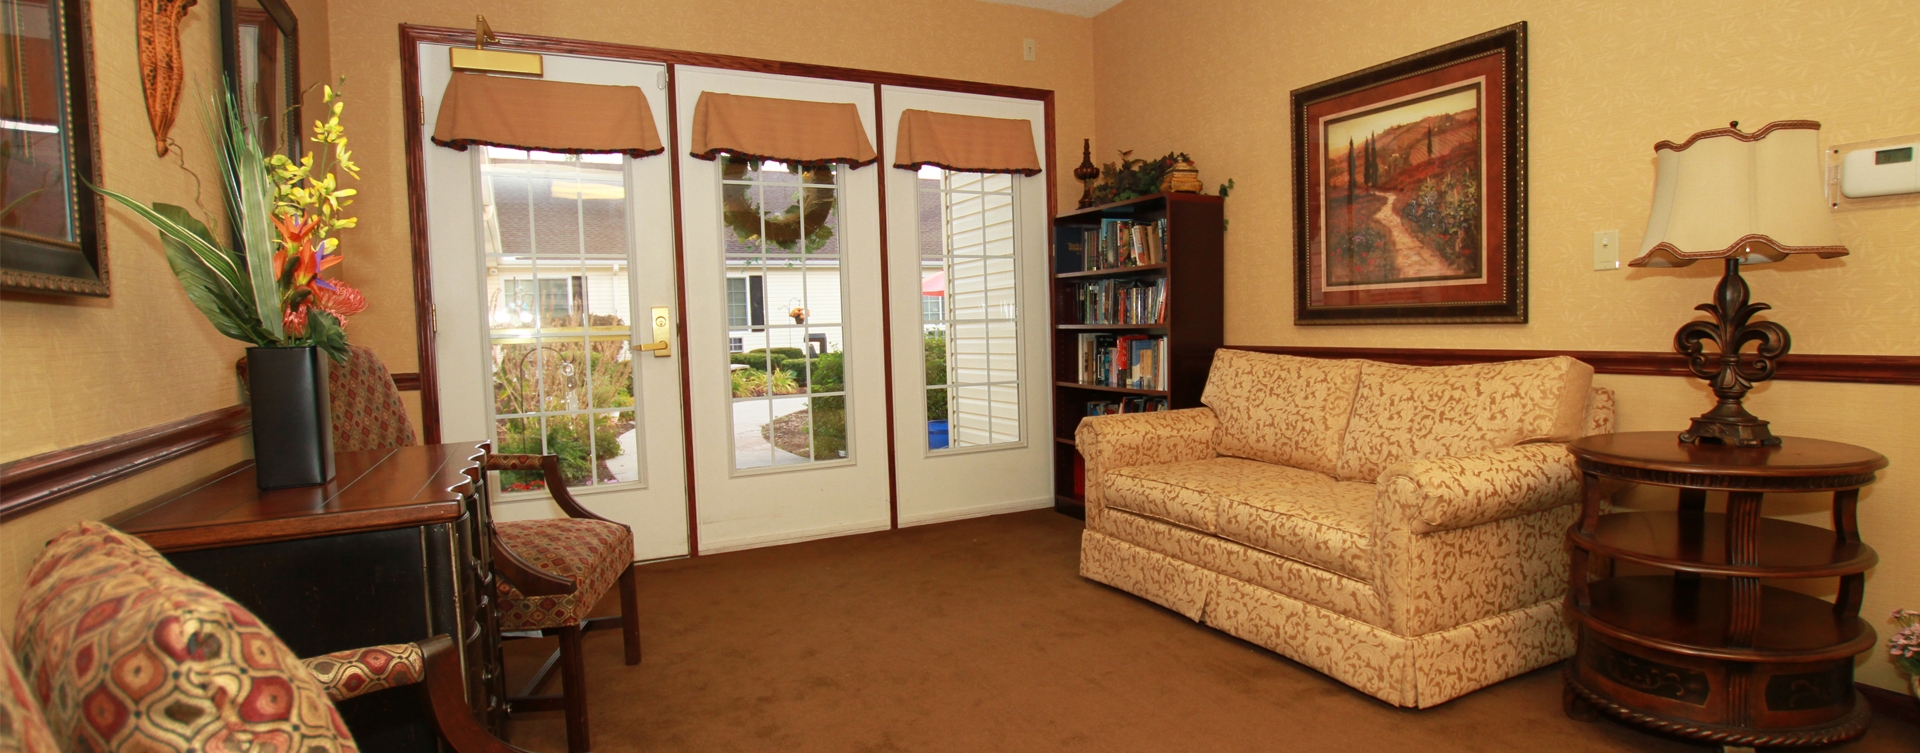 Enjoy a good snooze in the sitting area at Bickford of Saginaw Township